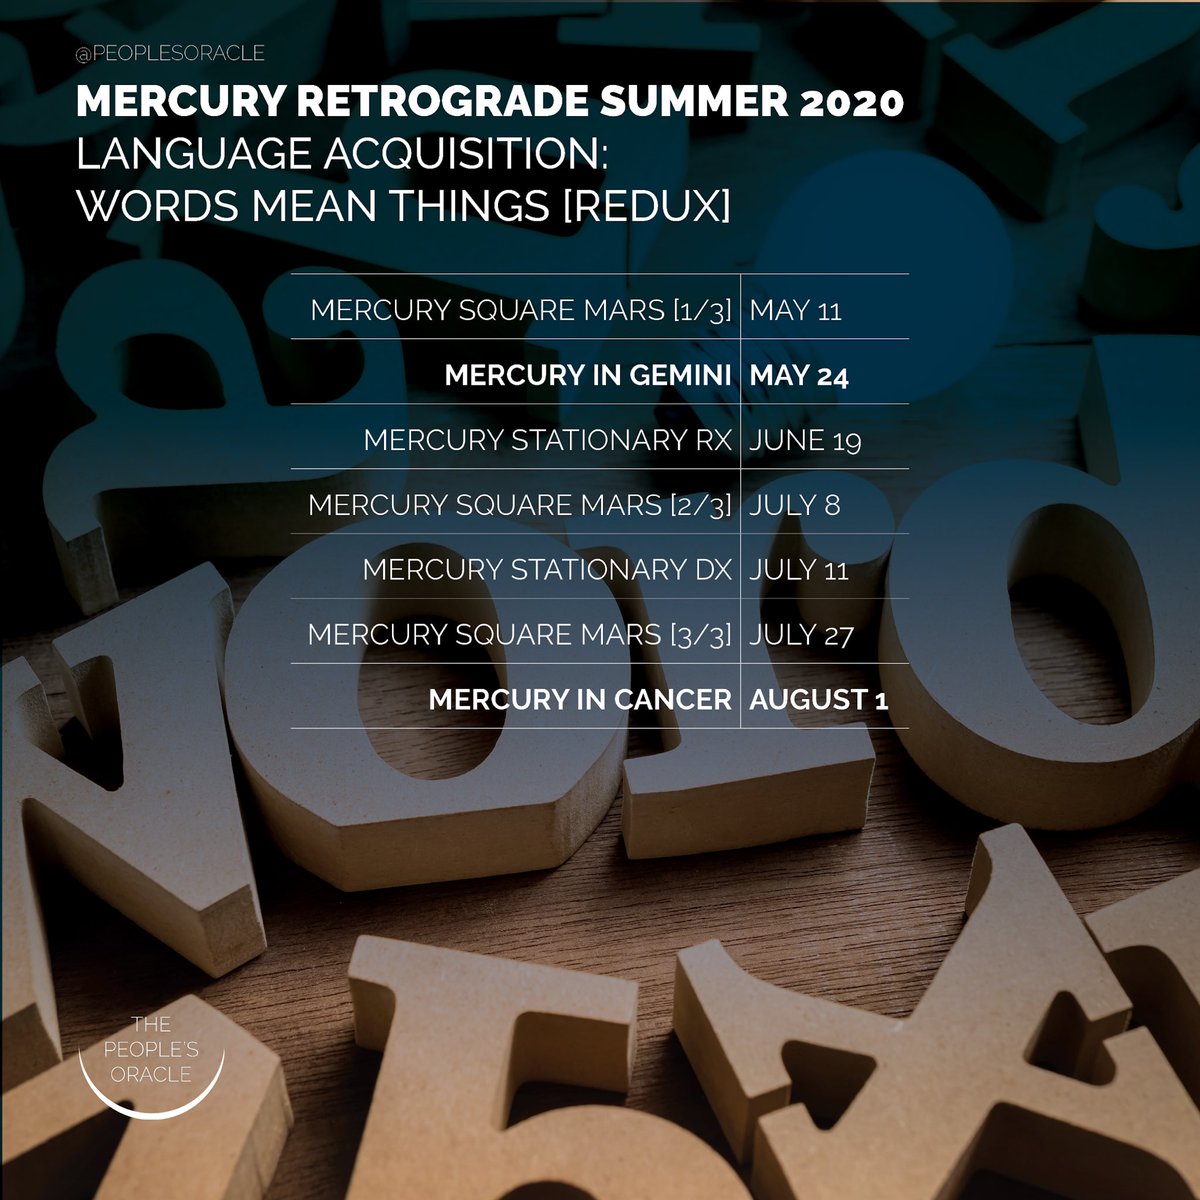 Mercury enters Gemini today. It’s another important turning point for  #MercuryRxSummer2020. This rx sets off almost every eclipse from 2019 January 5, July 2, December 26. Also ones in 2020: June 21 and July 4. That July 4 one is MAJOR!